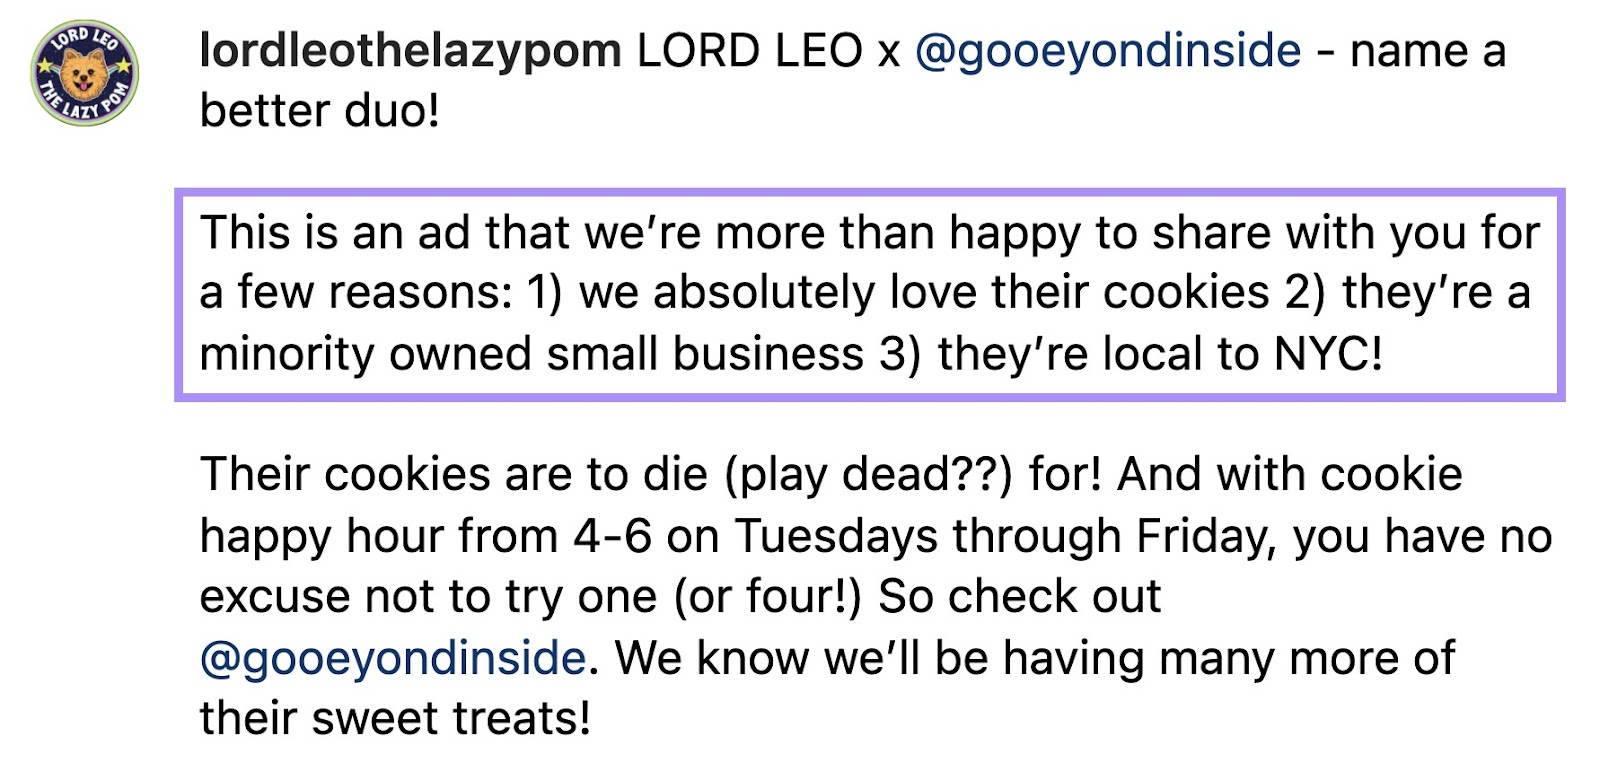 Nick Sheingold explains why they're happy to run an ad for Lord Leo the Lazy Pom